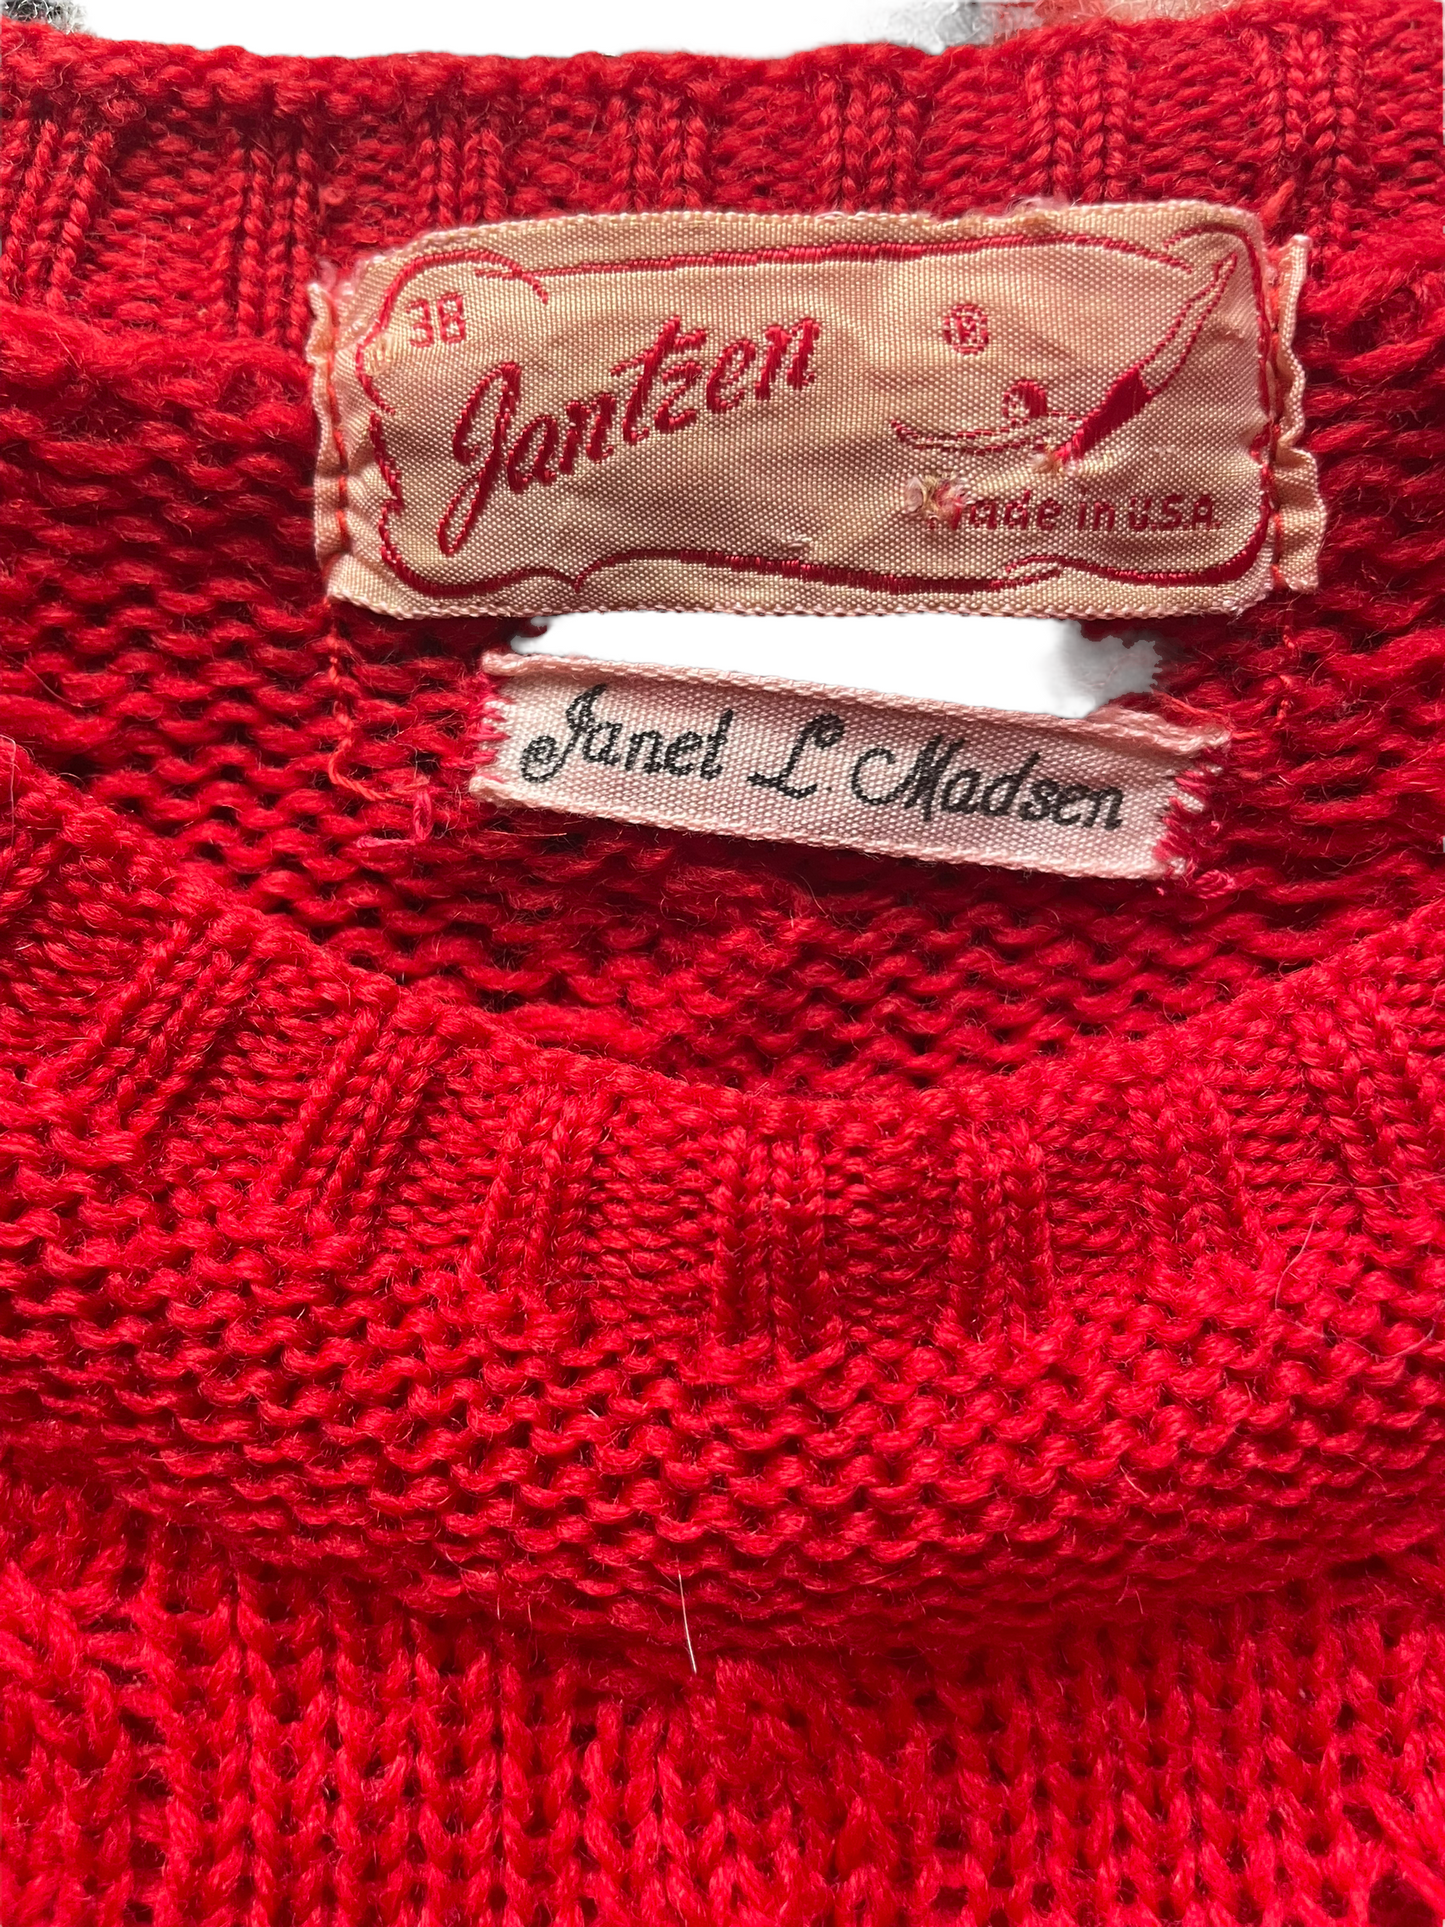 Vintage 1950s Jantzen Cable Knit Wool Sweater | Barn Owl Seattle | Seattle Vintage Sweaters View of maker tag.